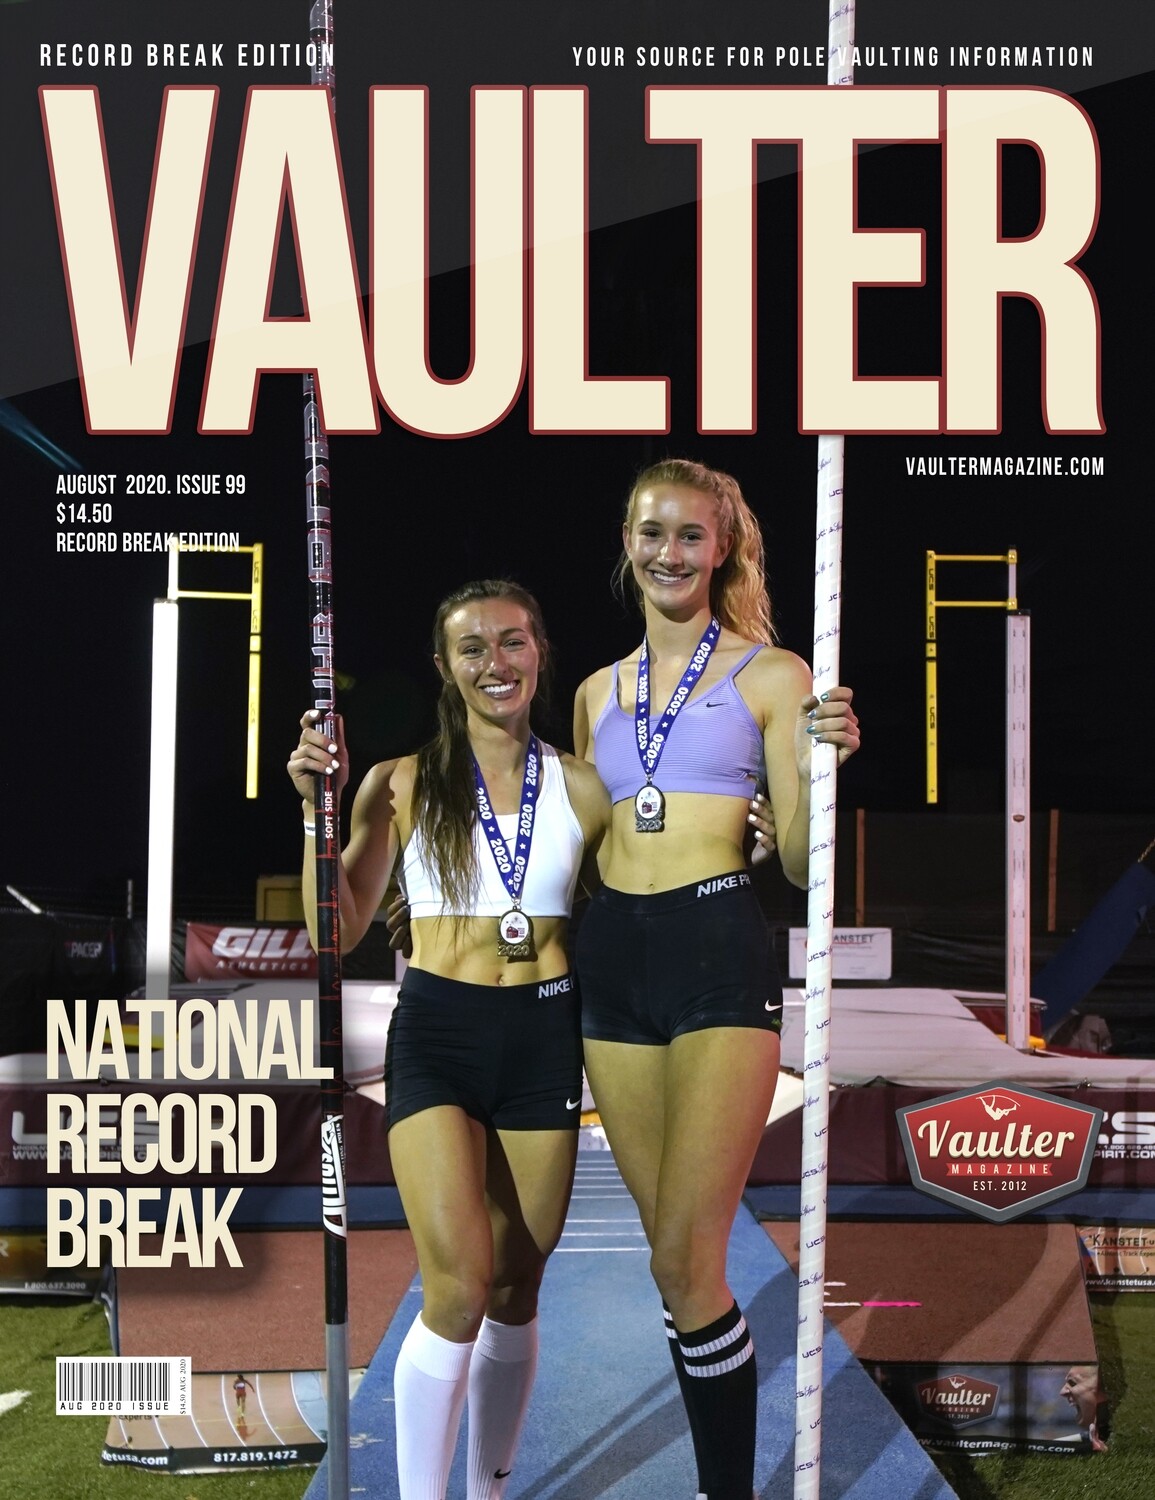 August 2020 National Record Break Issue of Vaulter Magazine U.S. Standard Mail